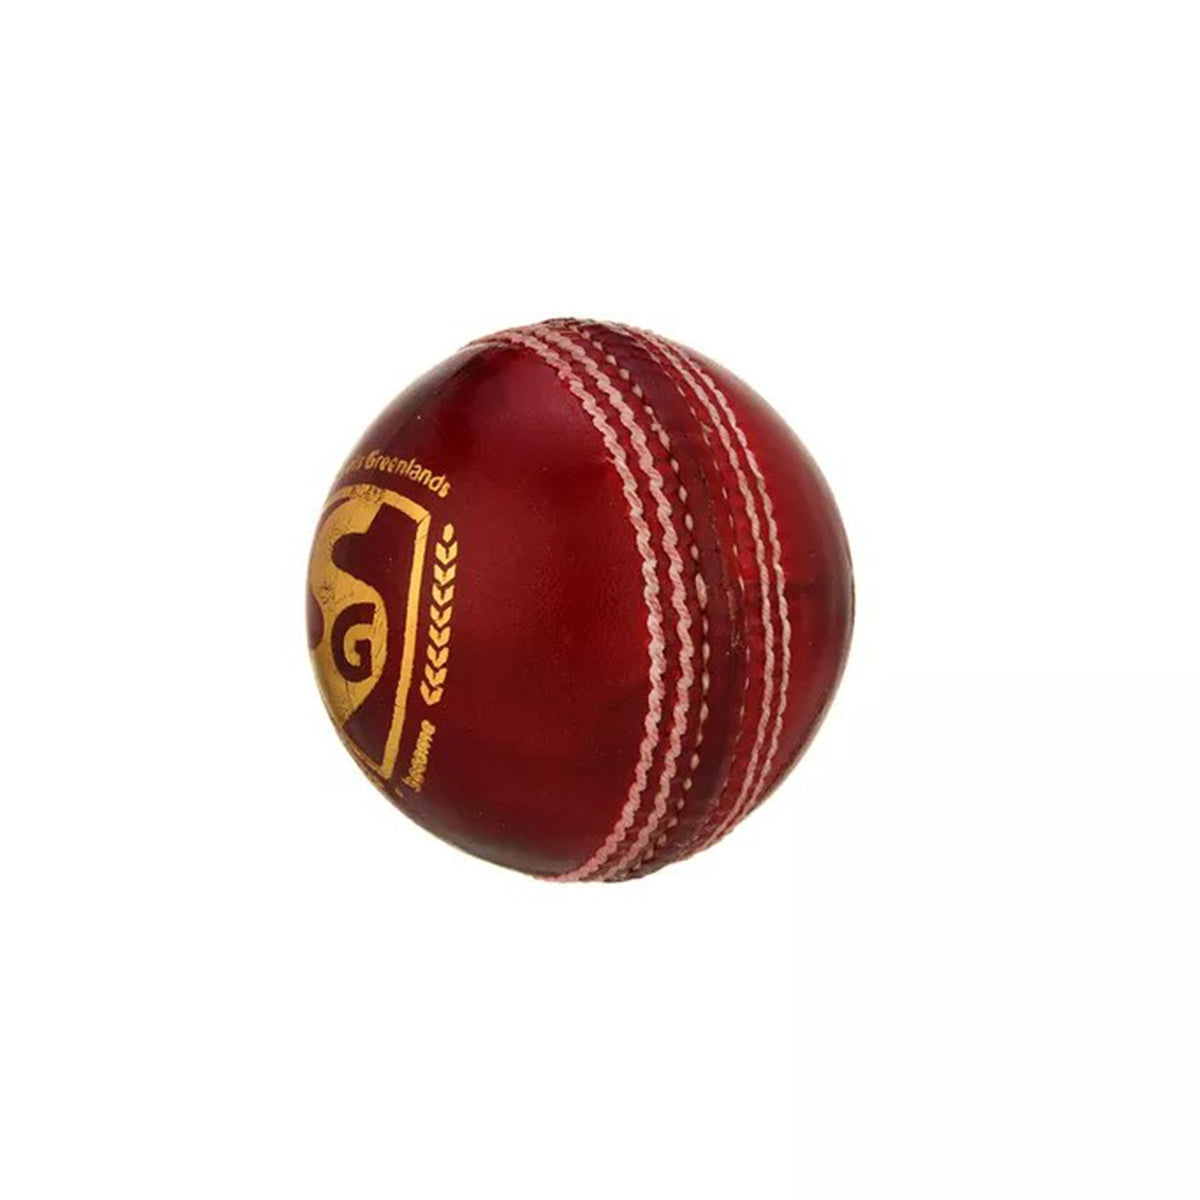 SG Club™ Red Leather Cricket Ball